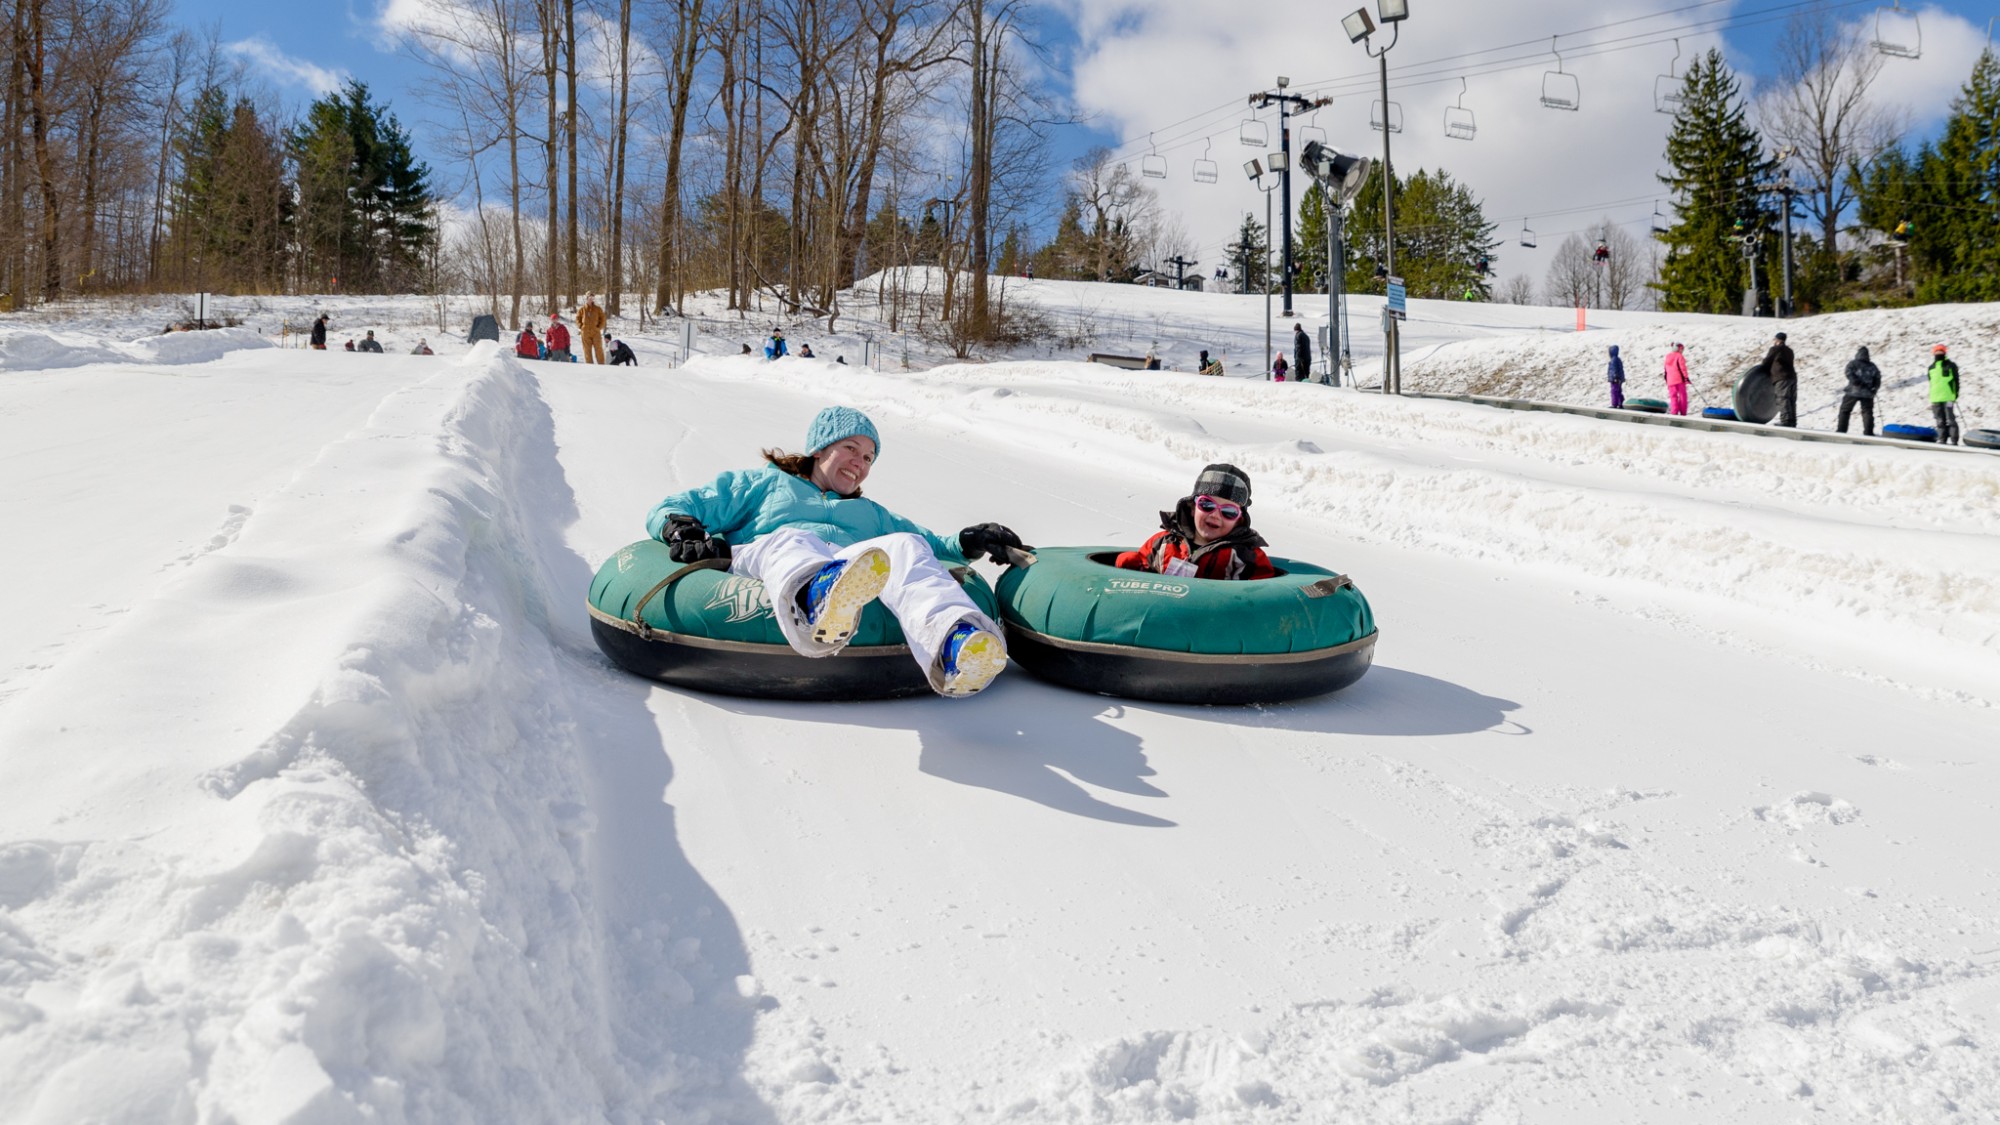 No walking uphill with Snow Trails Tubing Park Conveyor Carpet Lift Ride for Snow Tubing